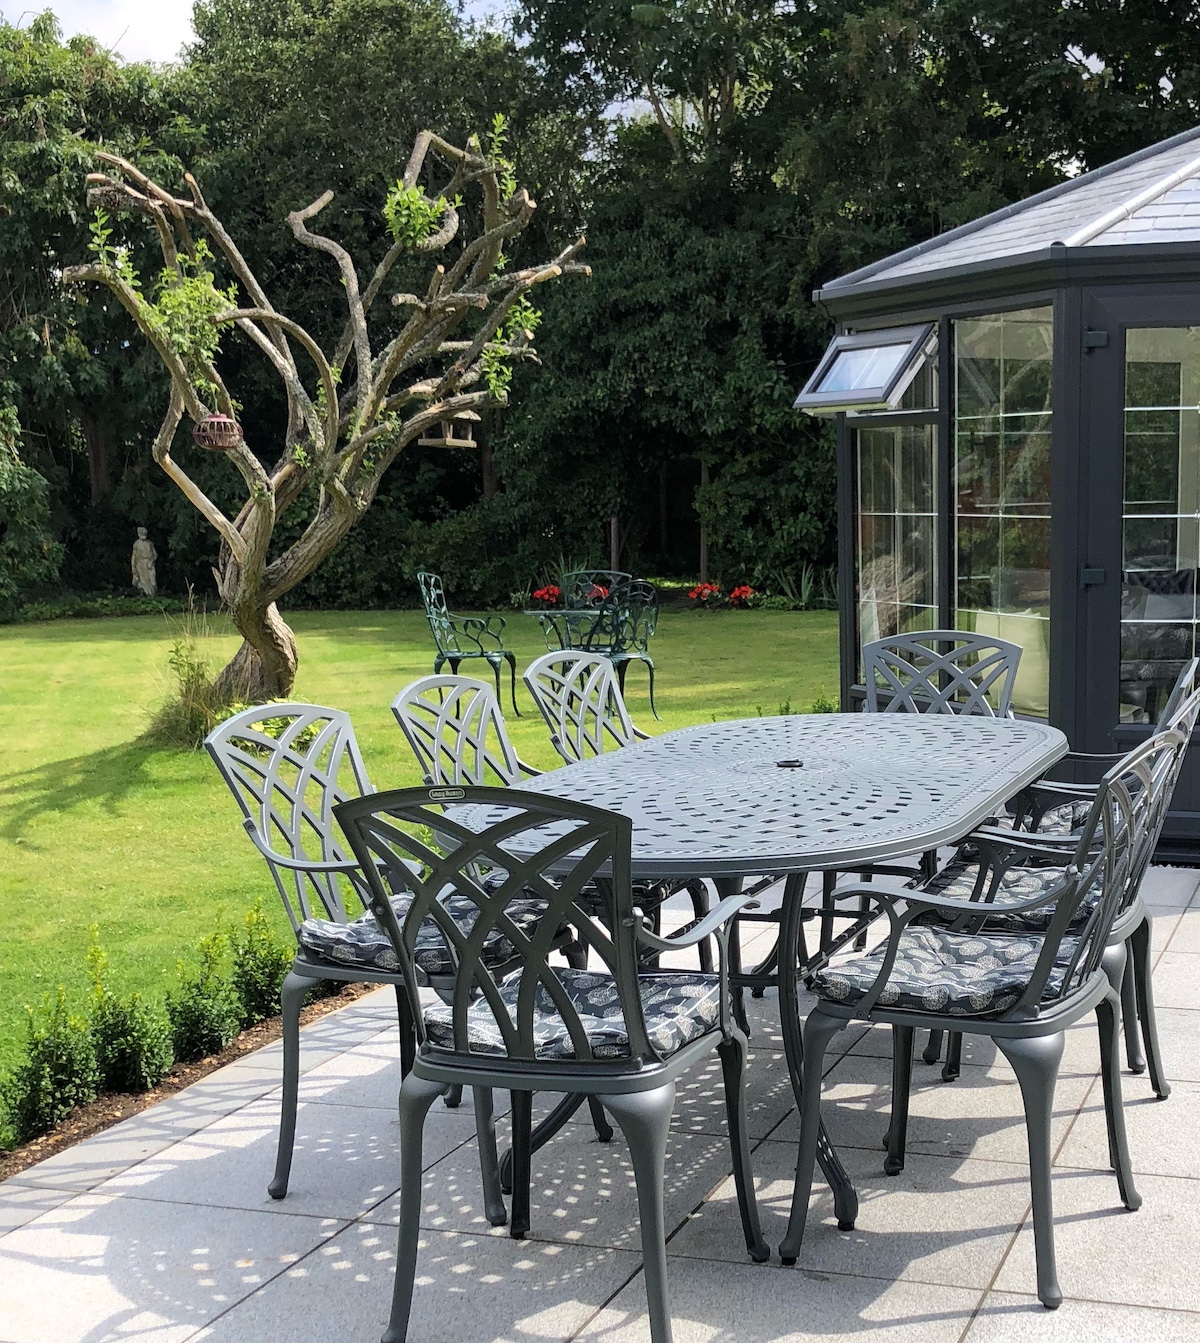 How can you achieve the different styles with our garden furniture collection?